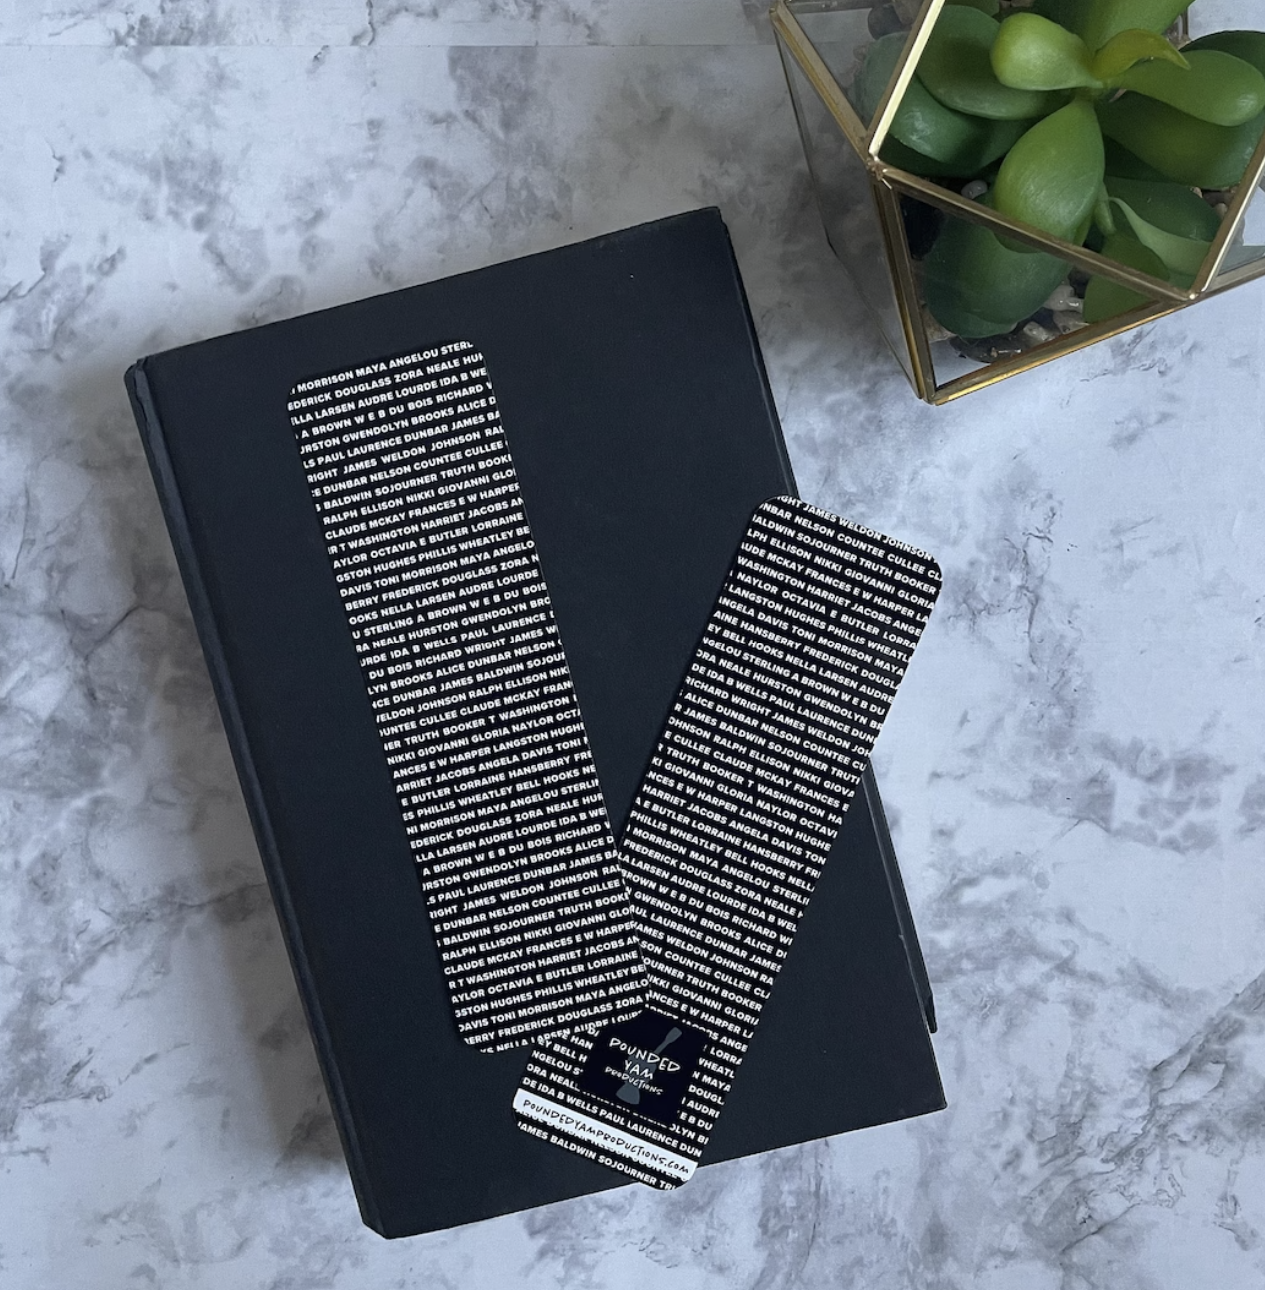 Picture of two black bookmarks covered in small white text listing Black authors like Toni Morrison and Maya Angleou set on a black book against a marble background